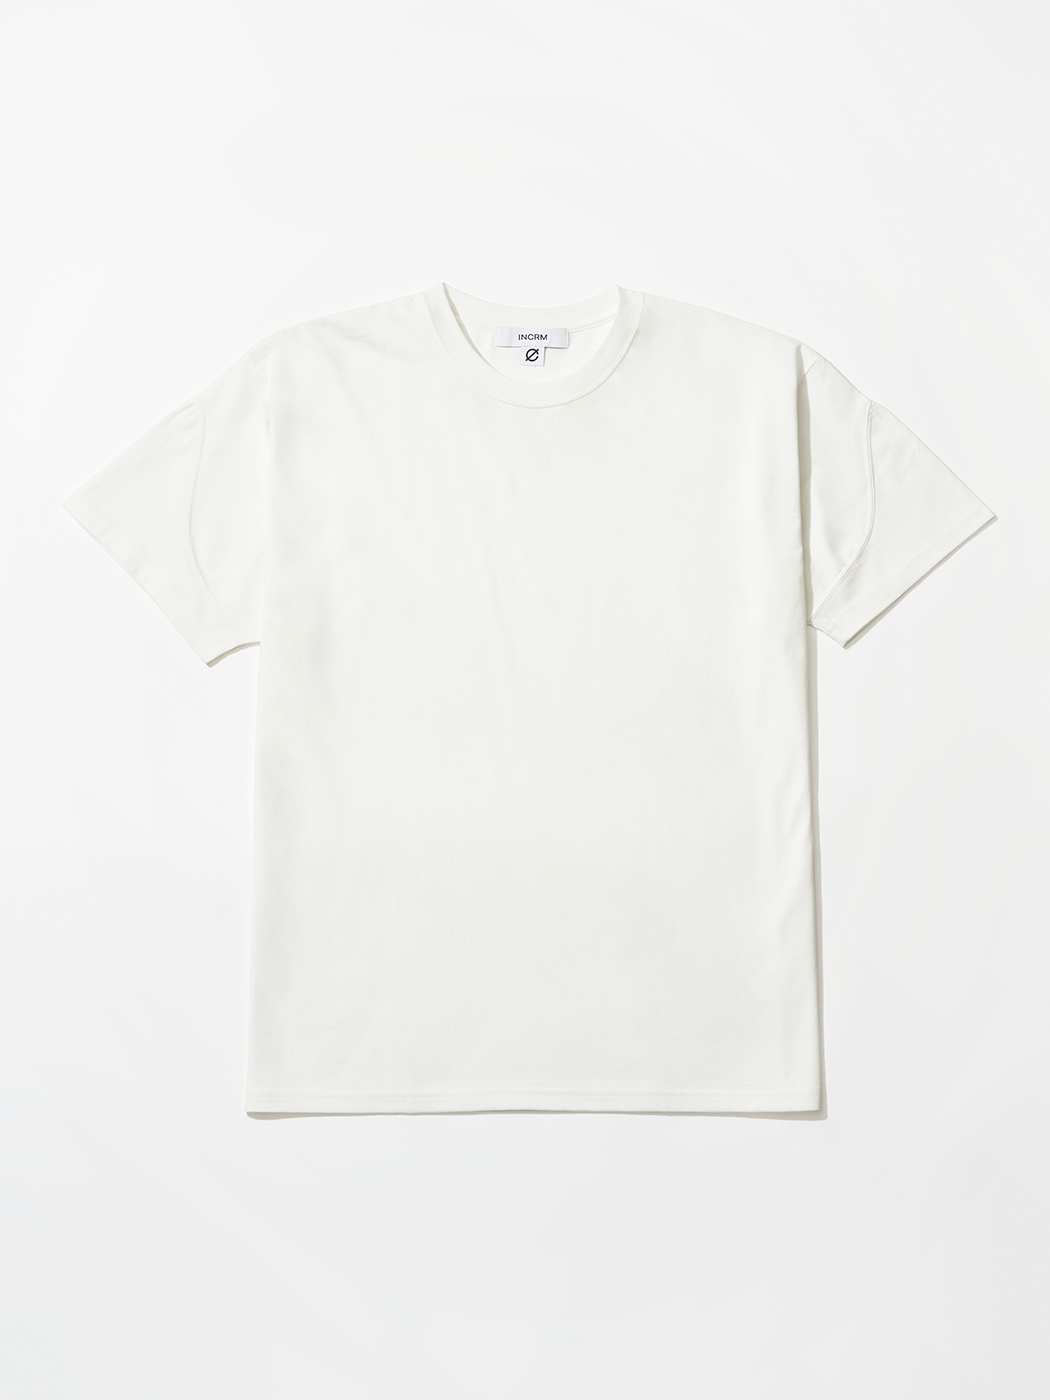 S/S T-Shirt (2Pack)